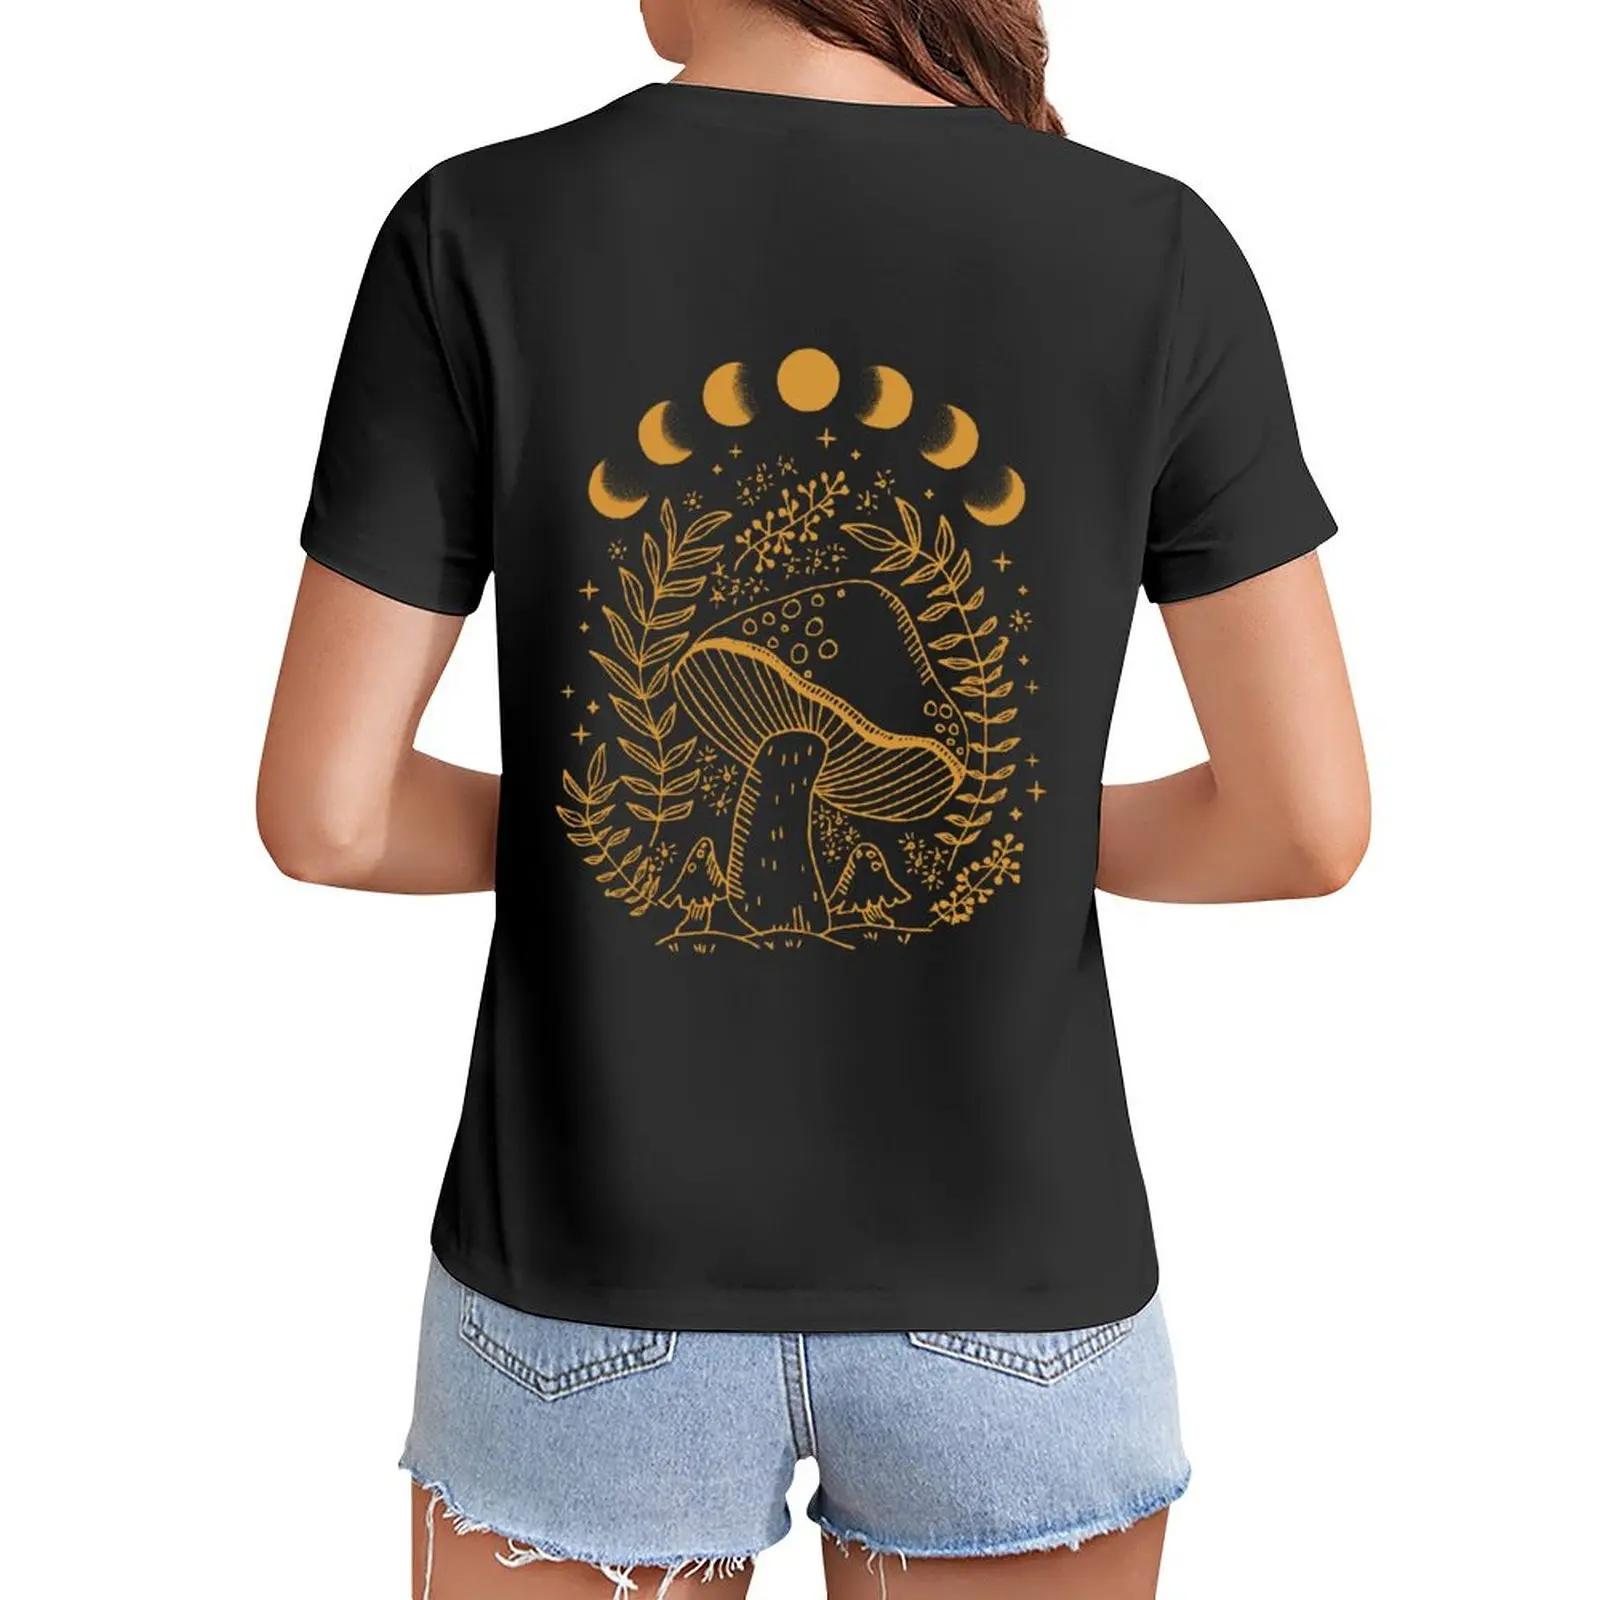 

Dark Academia Aesthetic: Goblincore Cottagecore Witchy Moon with Fungi Mushroom Phases, Nature Forest Fairy Grunge T-Shirt